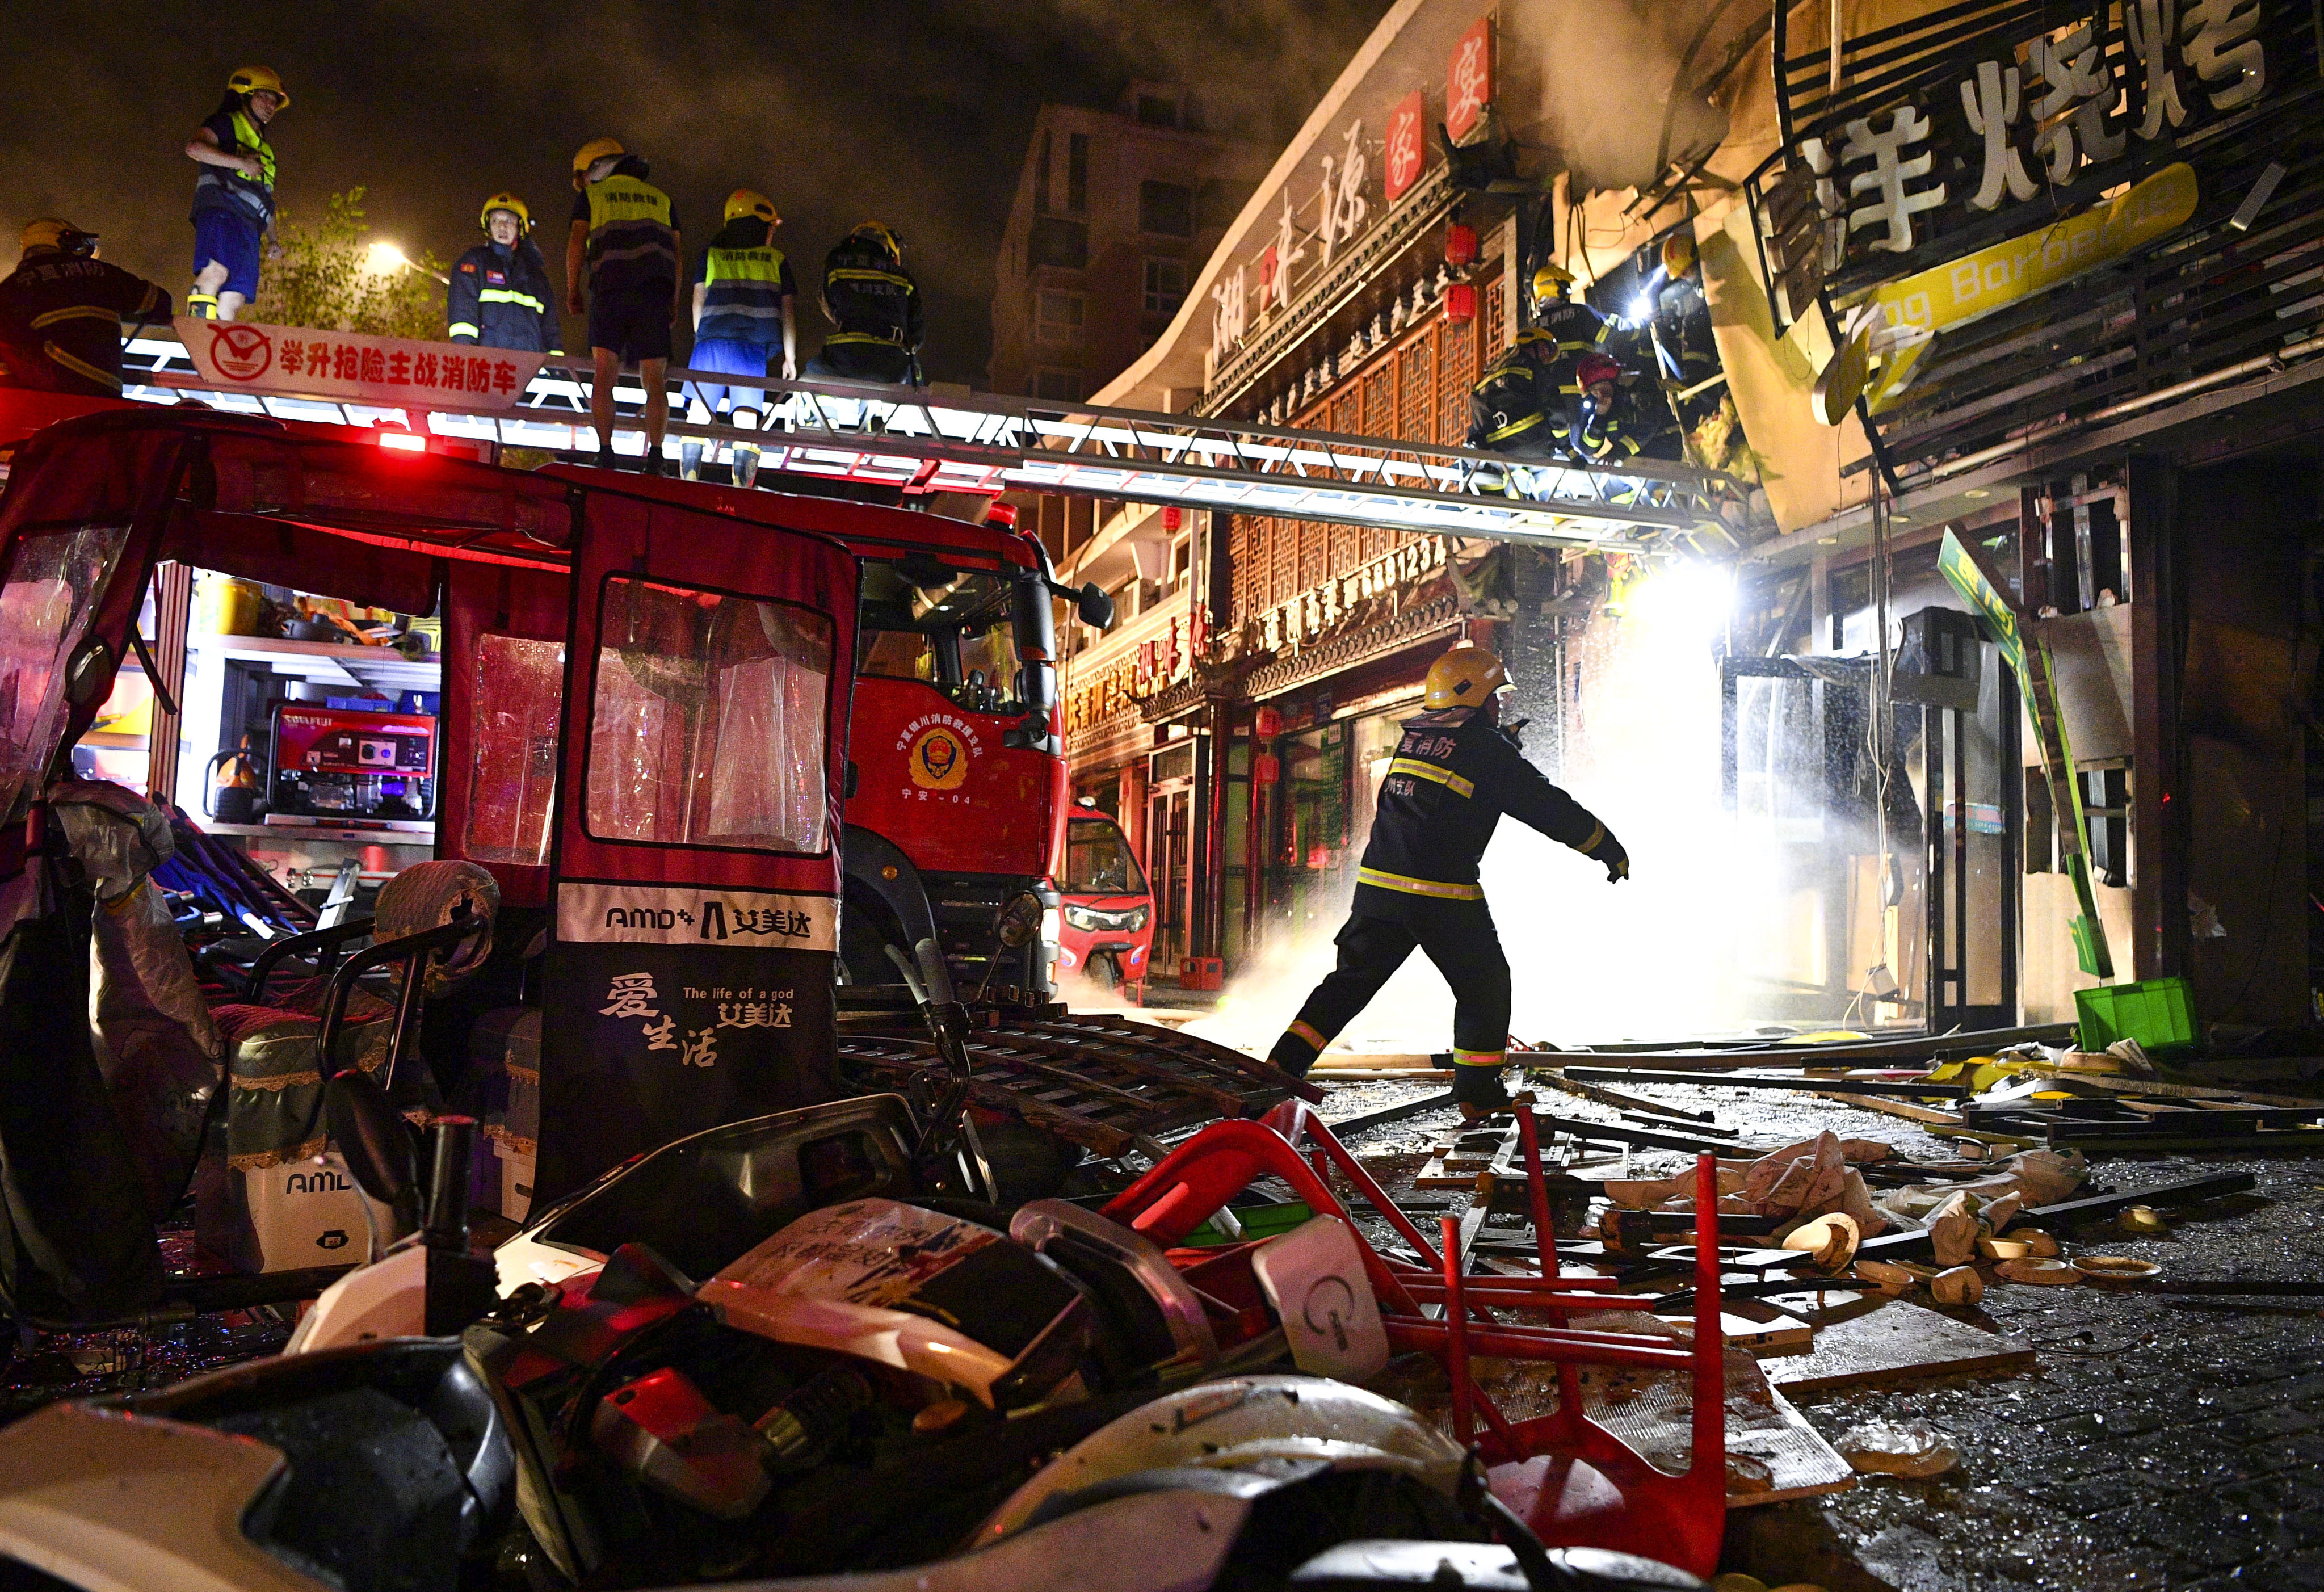 Firefighters at the scene of the shattered barbecue restaurant in Ningxia, China on Wednesday night. Photo: Xinhua